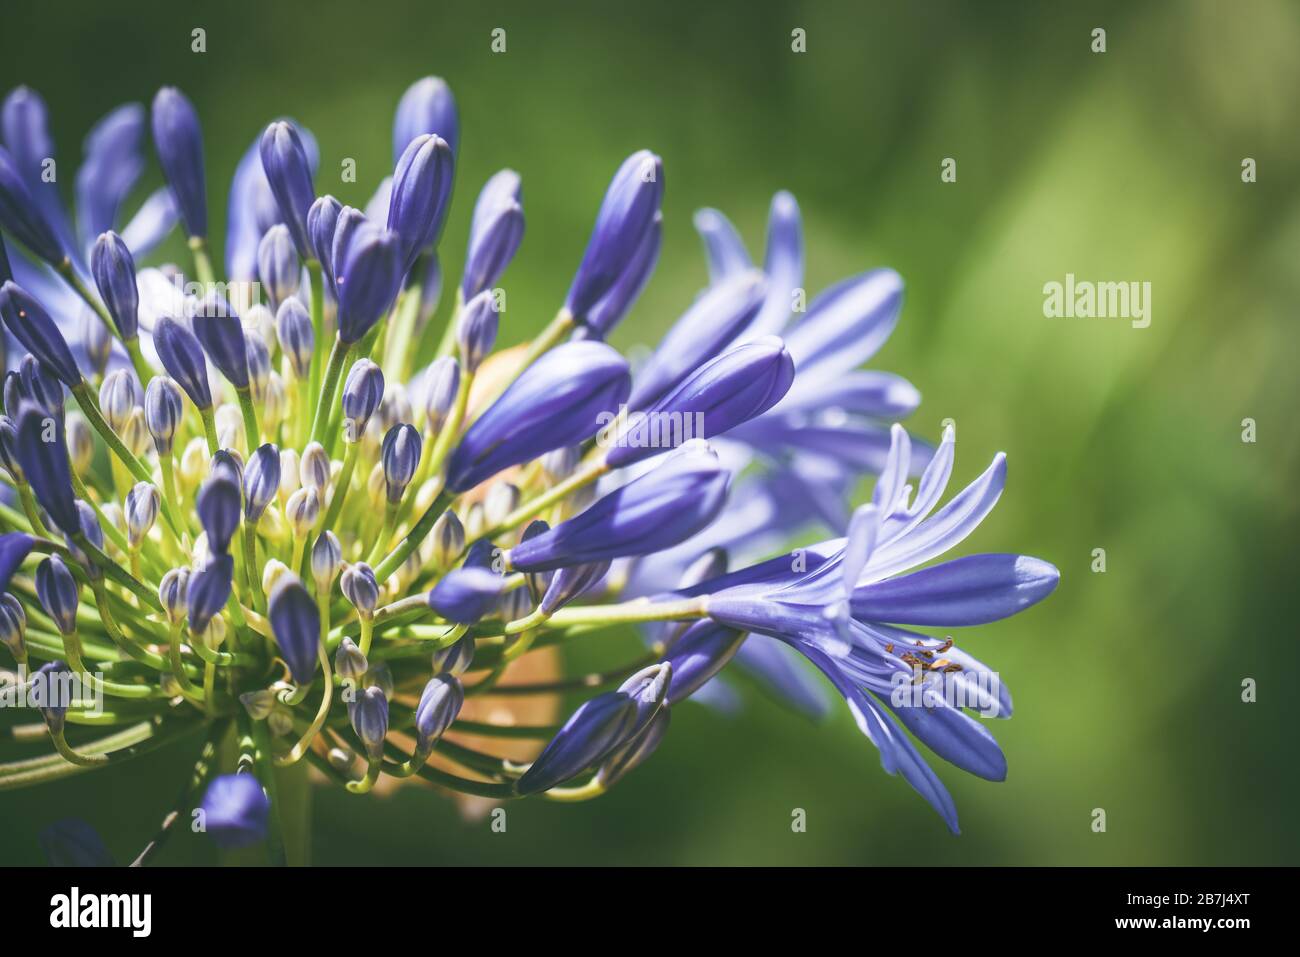 Blue flowers and buds of African lily also known as Agapanthus africanus Stock Photo